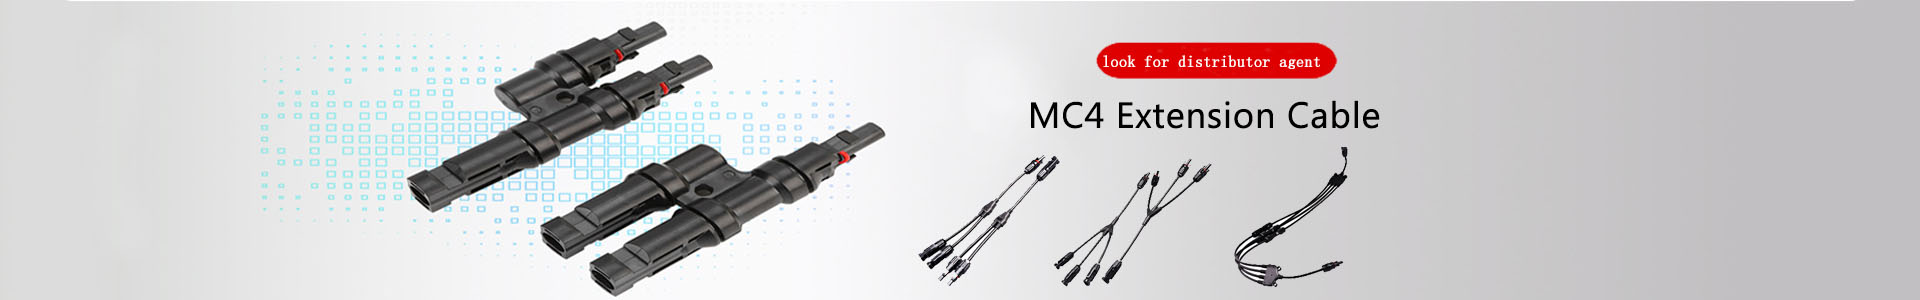 4mm solar cable with mc4-MC4 Extension Cable-Solar | solar connector,solar branch connector,diode fuse connector,MC4 extnsion cable,H1Z2Z2 solar cable, UL4703 solar cable | Leading manufacturer and supplier of solar pv cables and connectors